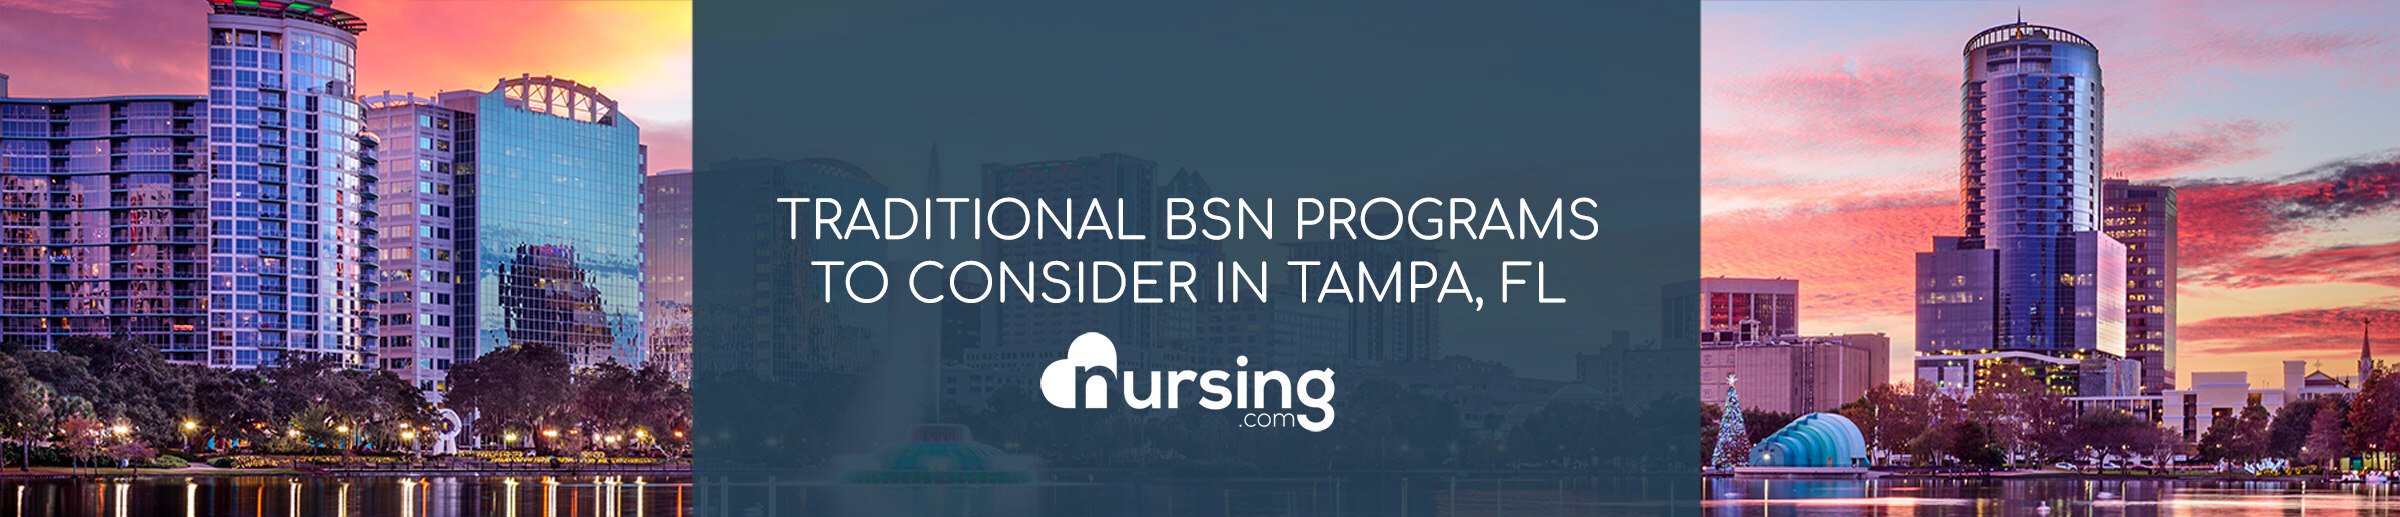 BSN Programs to Consider in Tampa, FL